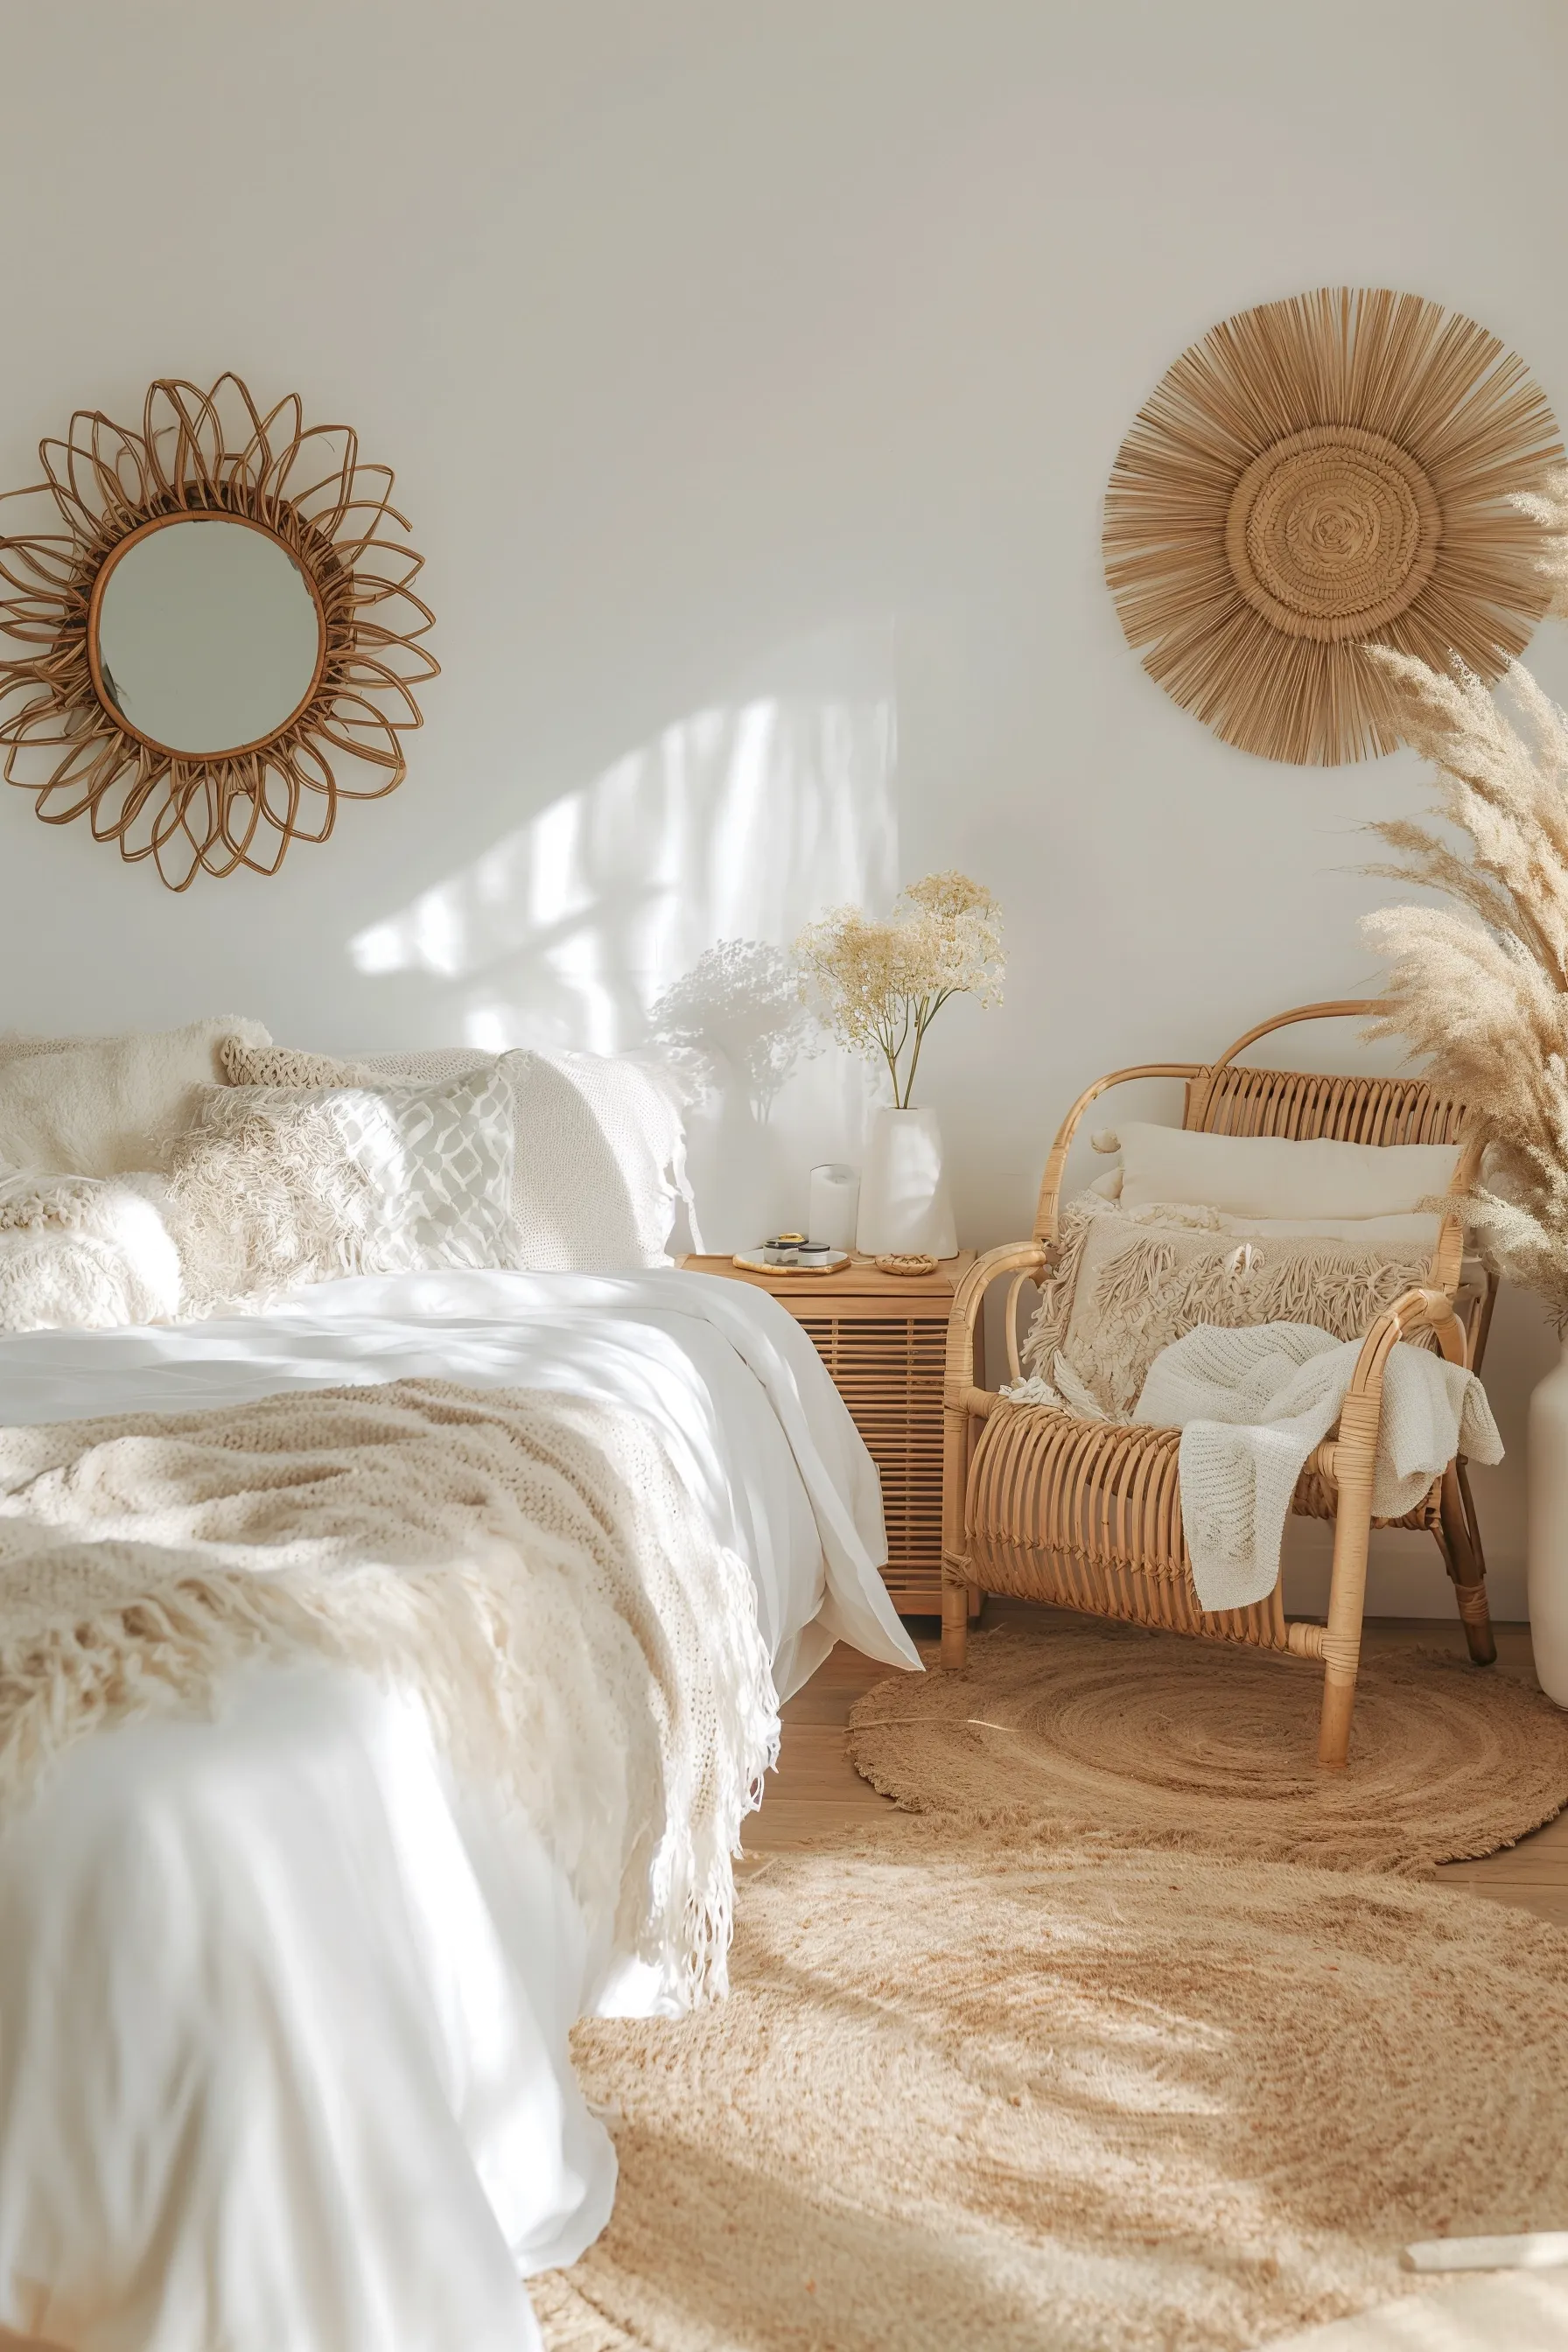 white bed with blue and white bed linen with pops of orange